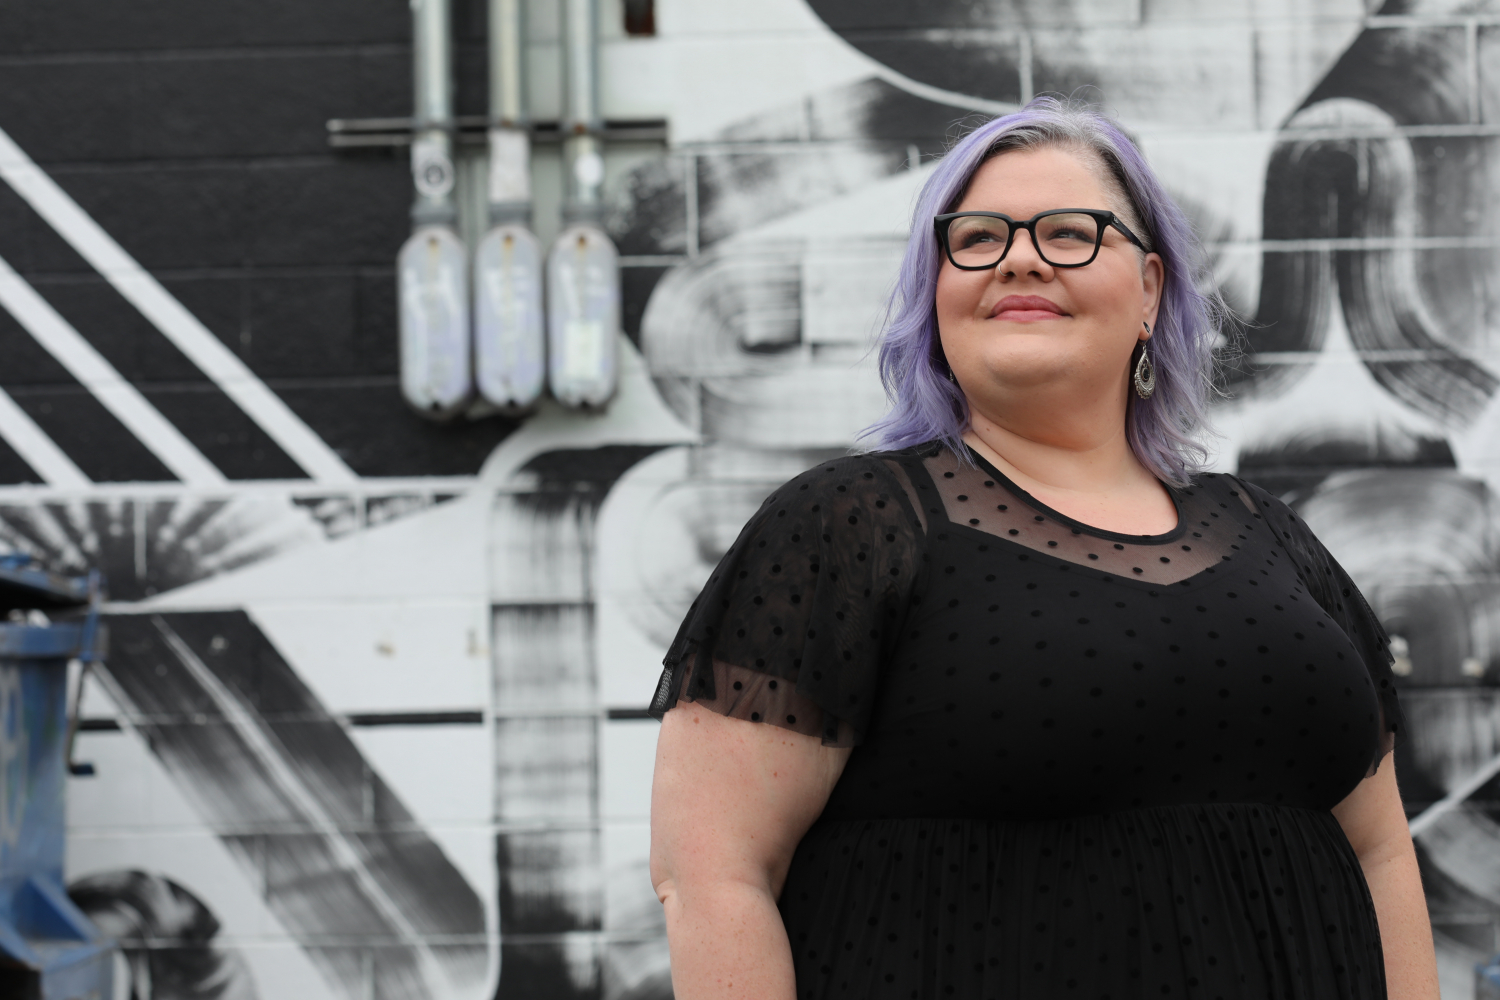 Smiling woman with lilac hair and dark glasses in a black polka dot top standing in front of a black and white mural